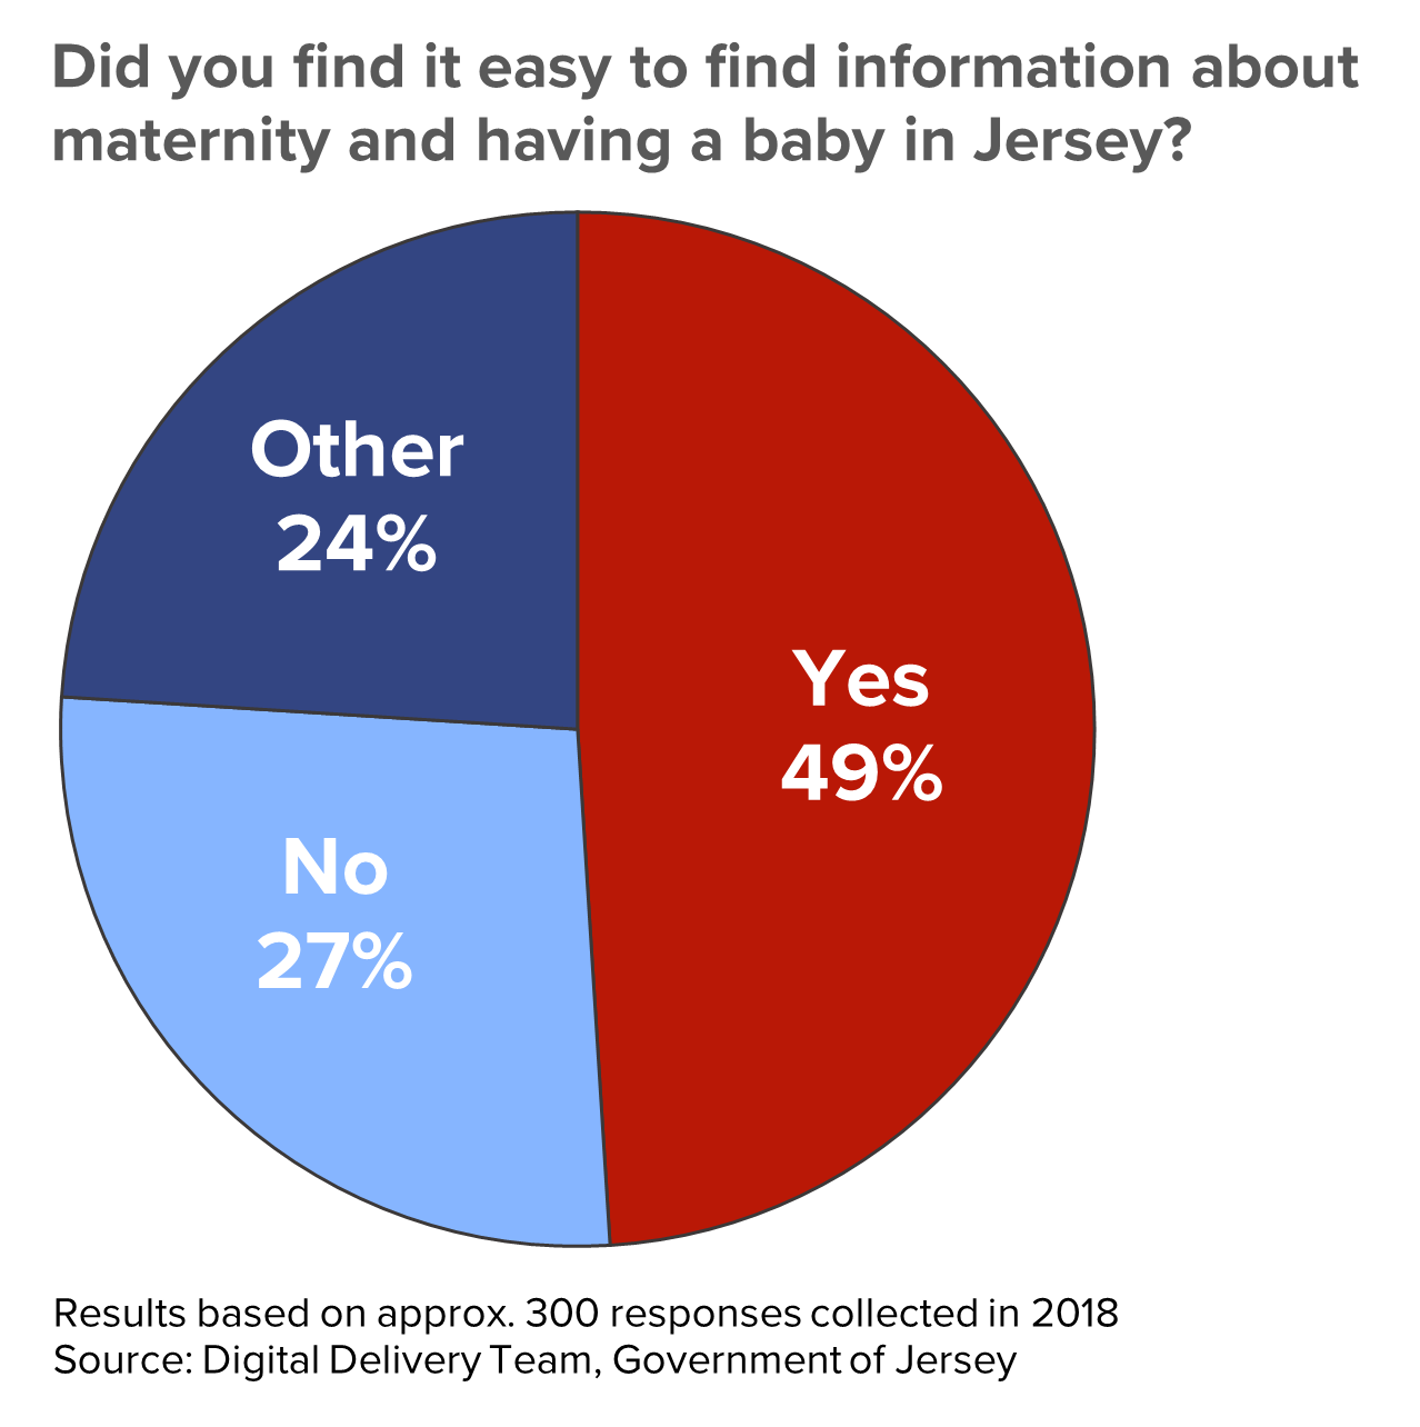 Survey results to the question, "Did you find it easy to find information about maternity and having a baby in Jersey?